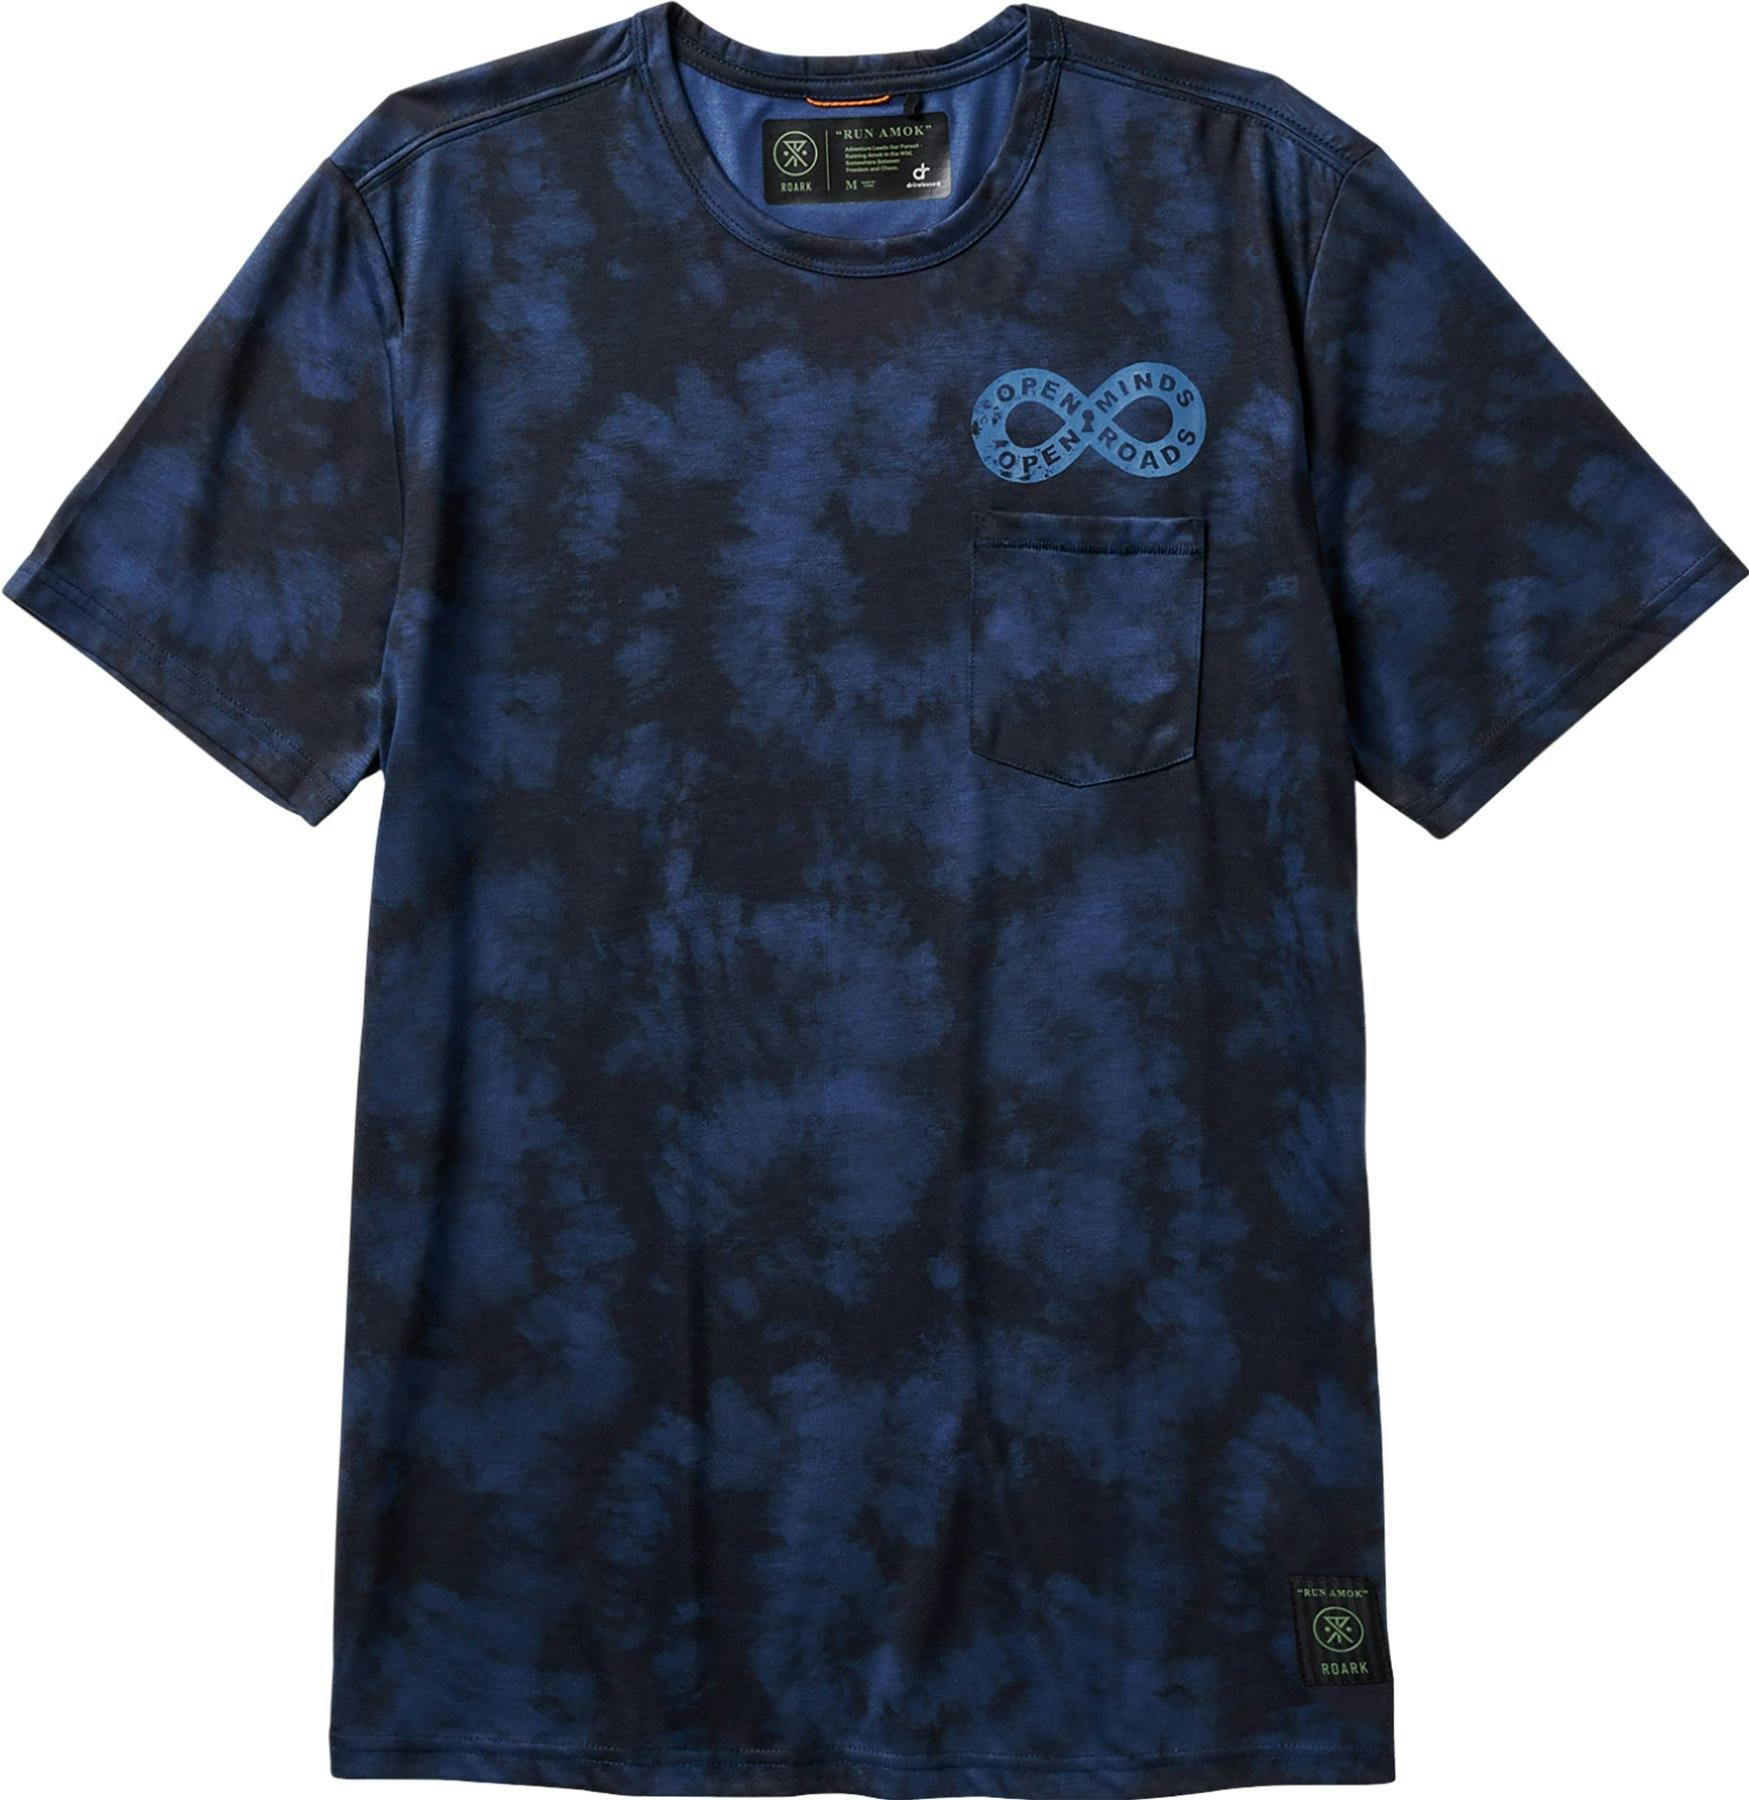 Product image for Mathis Tie Dye T-Shirt - Men's